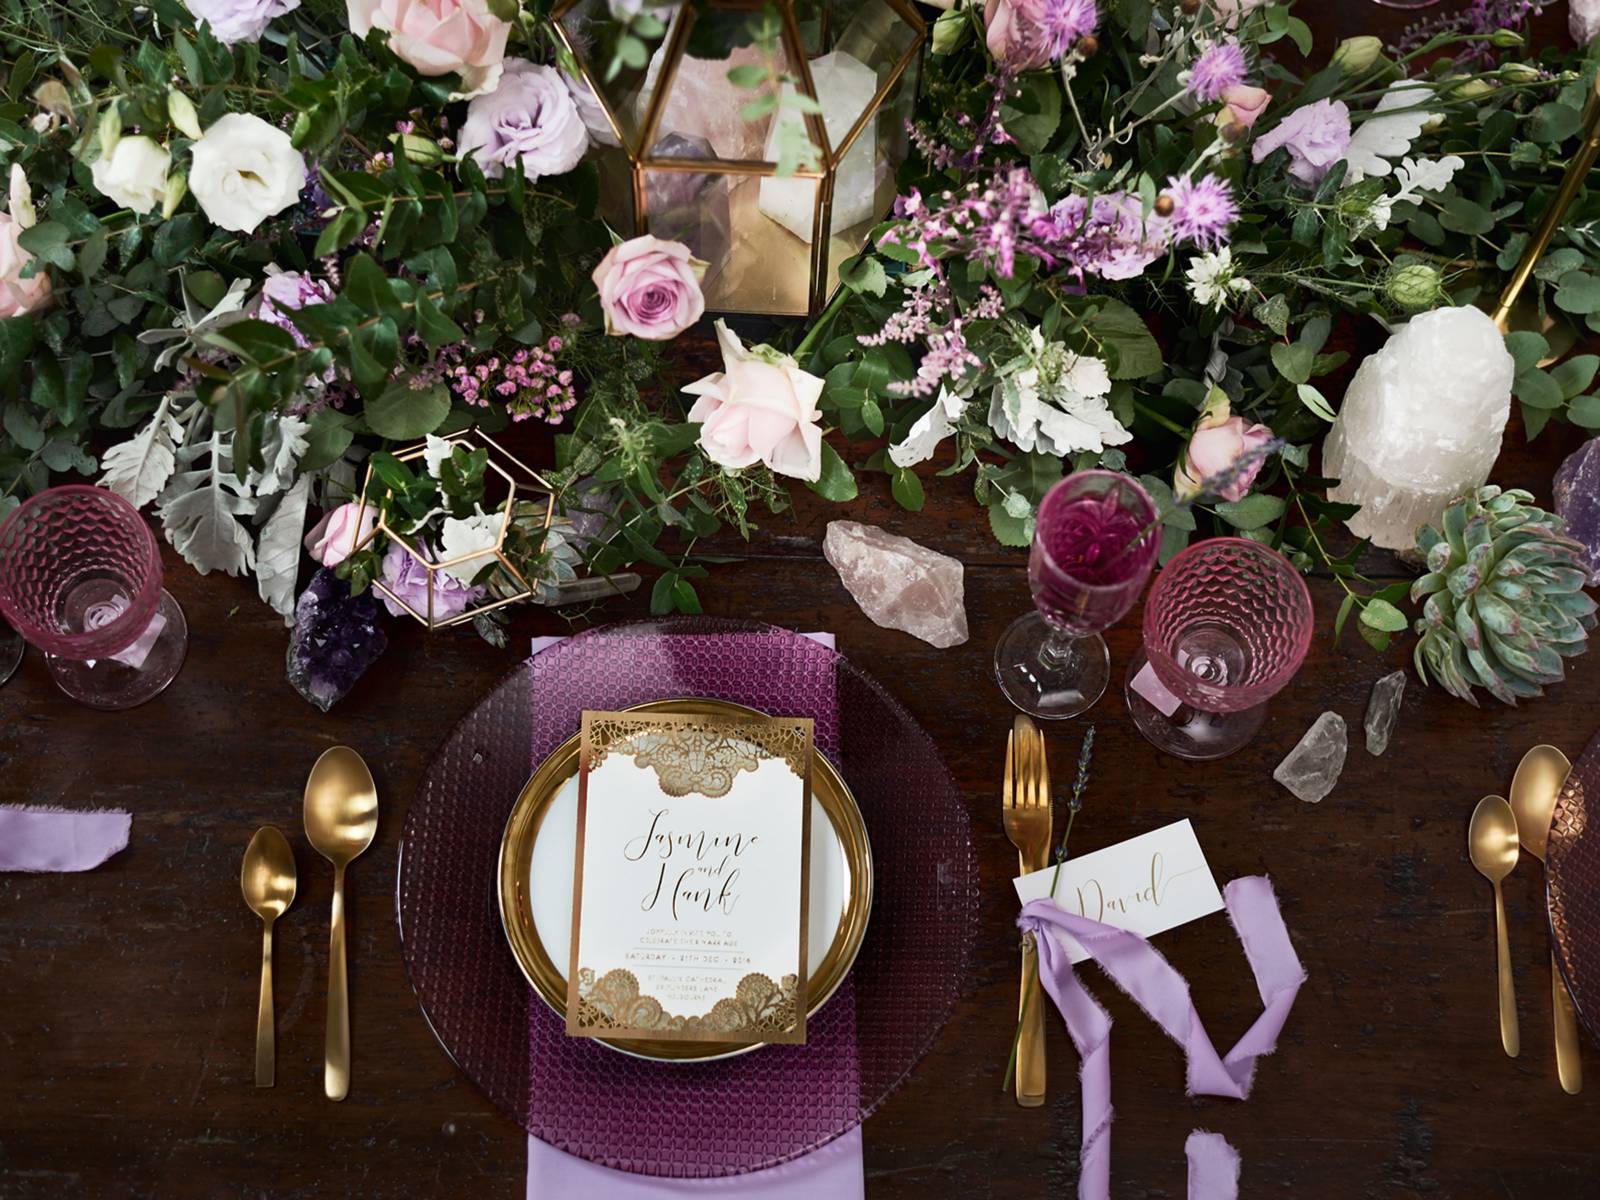 Tablescape of lavender and pink flowers with greenery with purple charger, white and gold plate